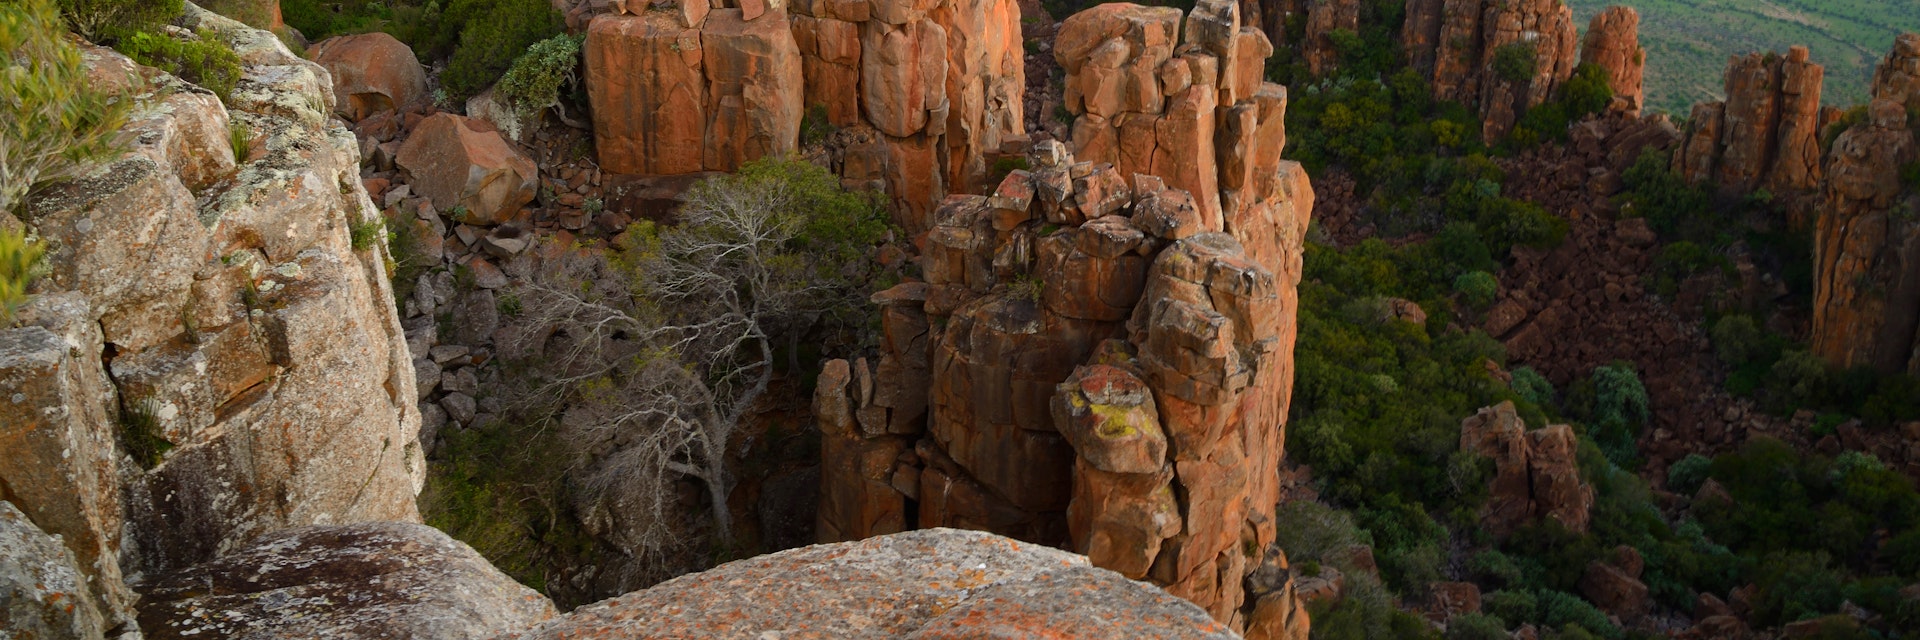 Valley of Desolation, Camdeboo National Park, South Africa.